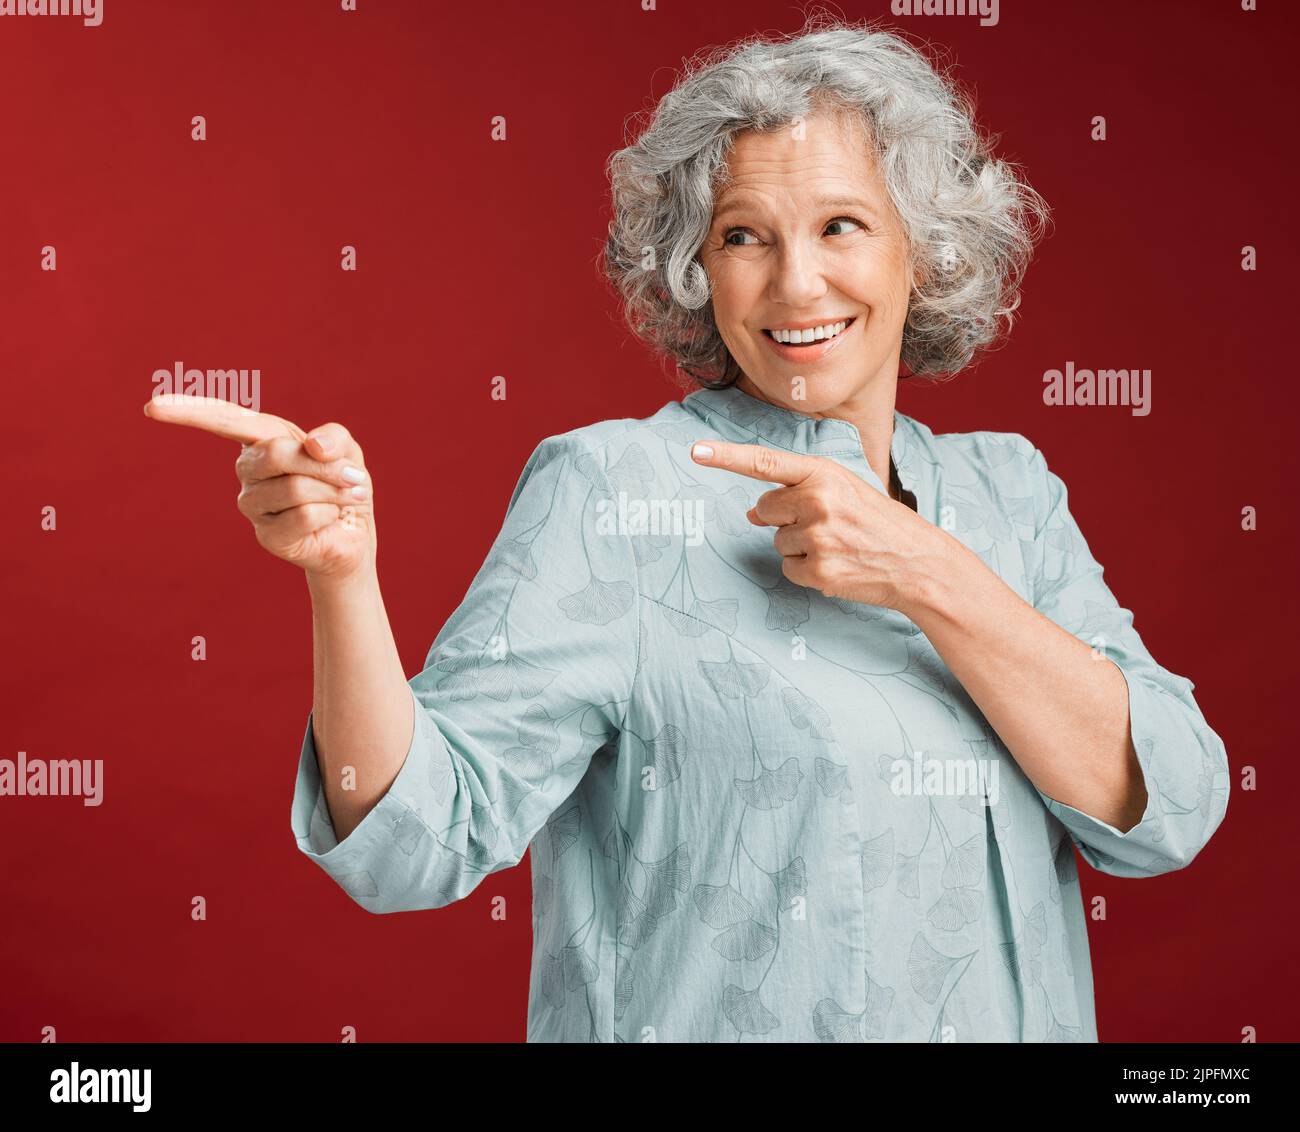 Portrait of mature woman, smiling and pointing with a gesture of affirmation, with a red background. Beautiful, confident and happy senior lady Stock Photo